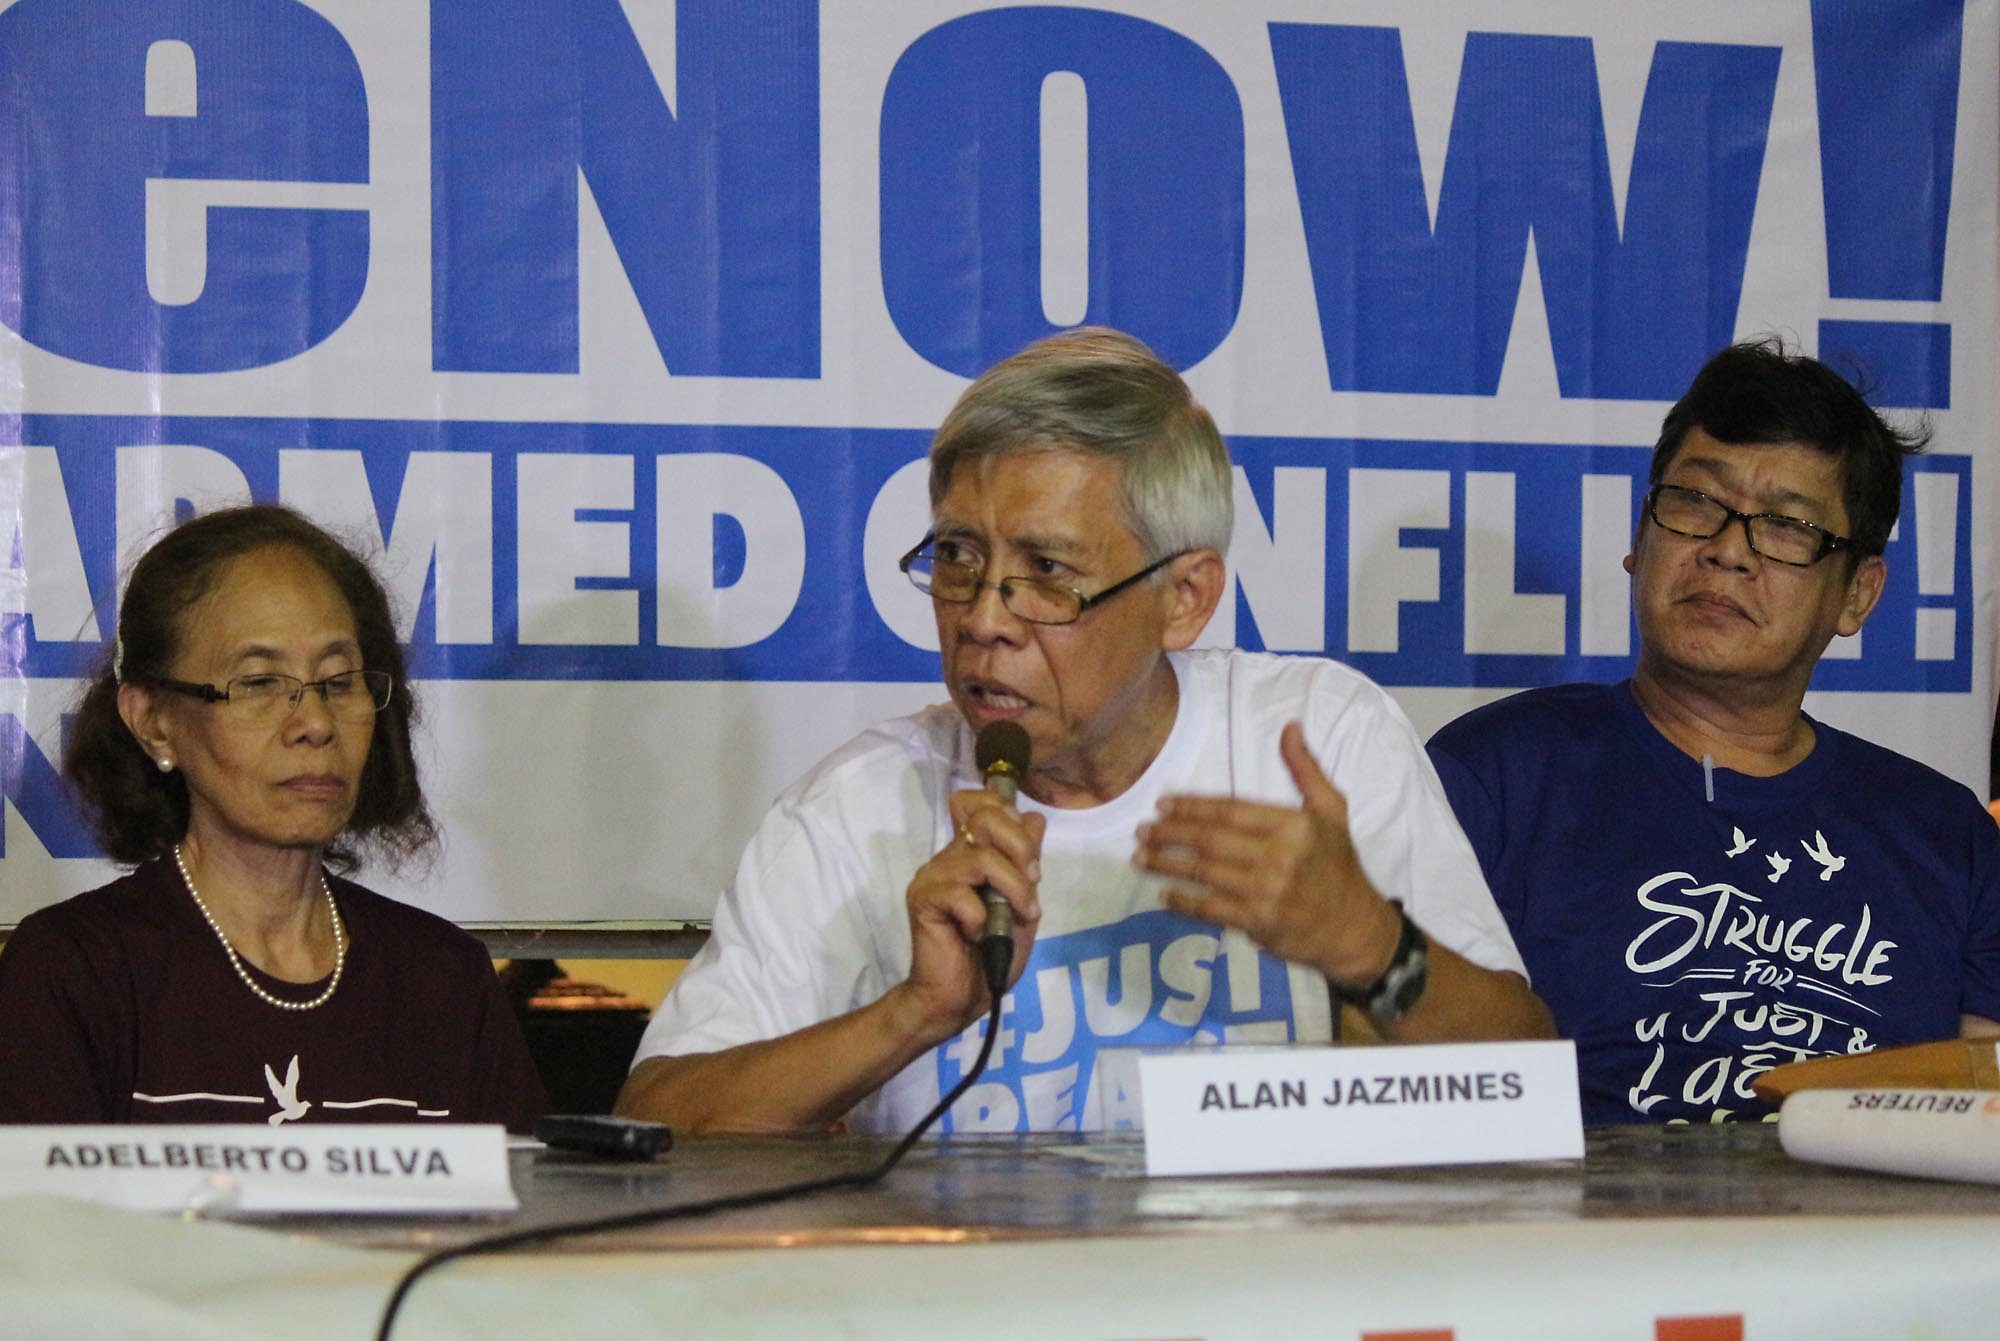 FREE. Freed political prisoners (from left) Concha Araneta Bocalo, Alan Jazmines and Ernesto Lorenzo hold a press conference at the social hall of the Episcopal Mission Center in Quezon City on August 18, 2016. Photo by Joel Liporada/Rappler 